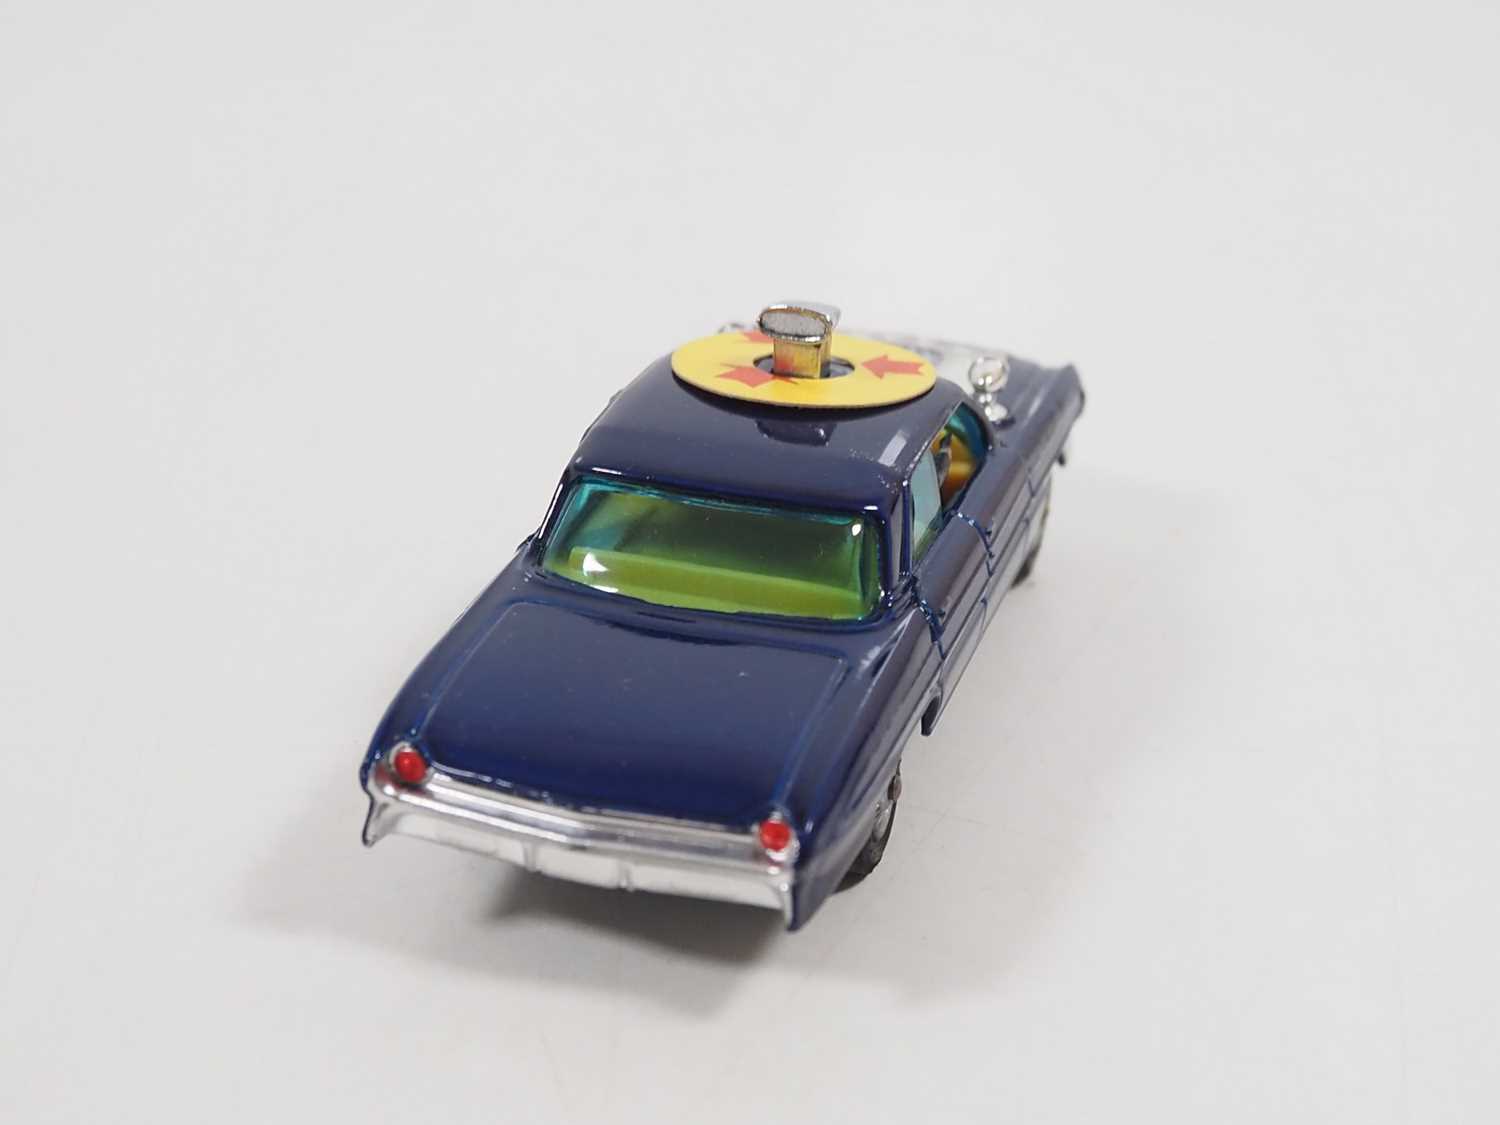 A CORGI 497 diecast Thrush-Buster Oldsmobile from 'The Man From U.N.C.L.E' - blue metallic version - - Image 5 of 9